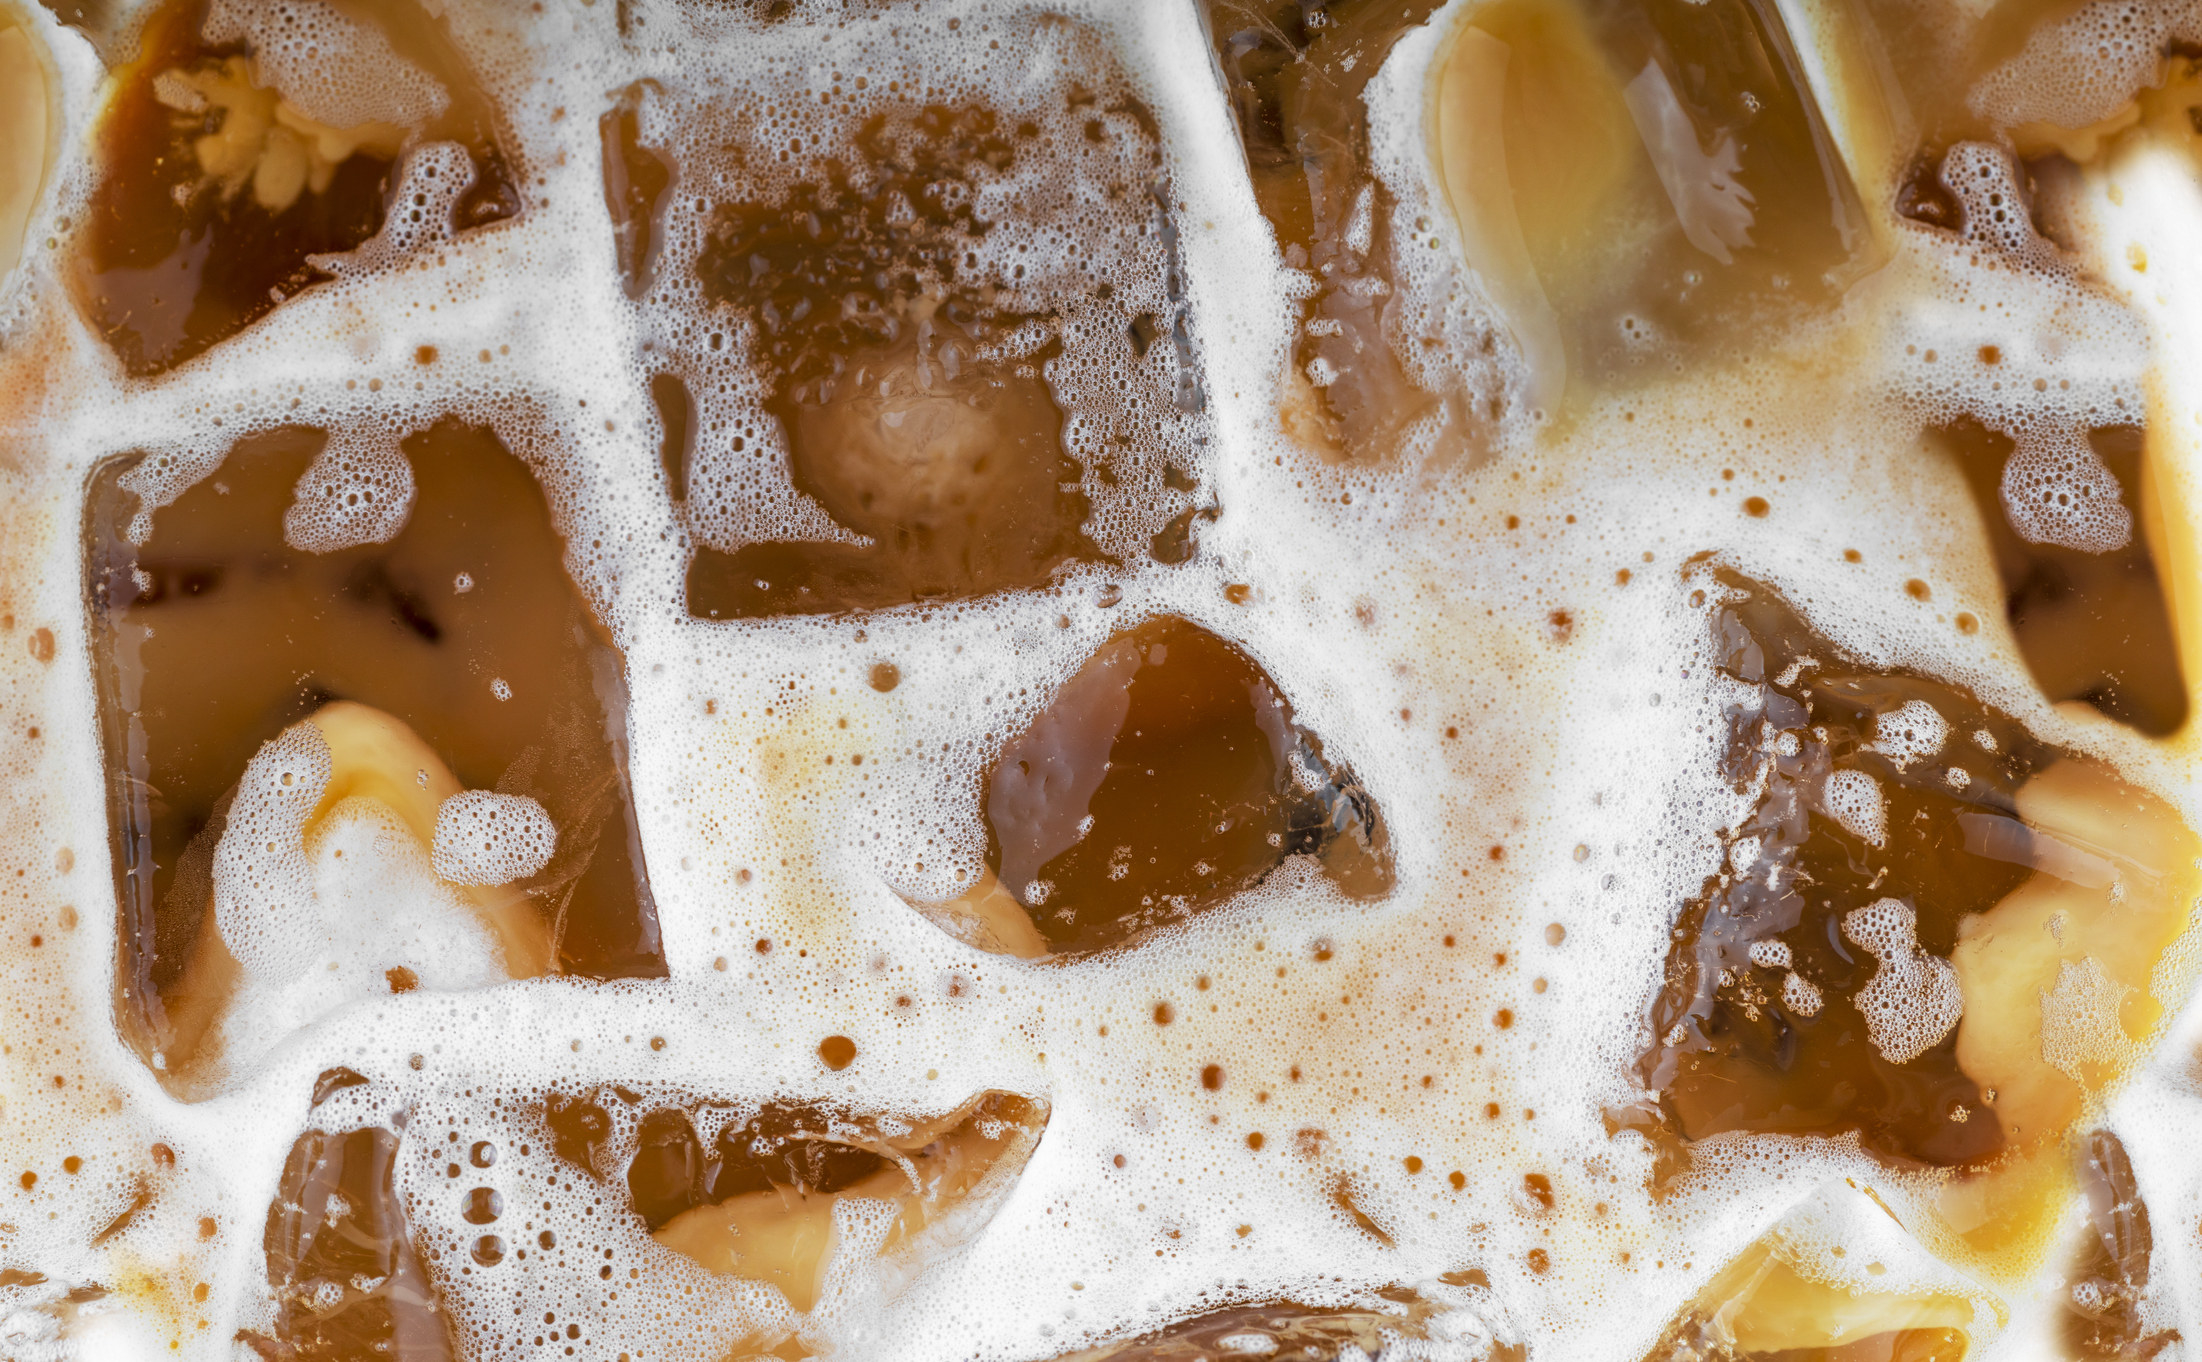 A close-up of Iced coffee.